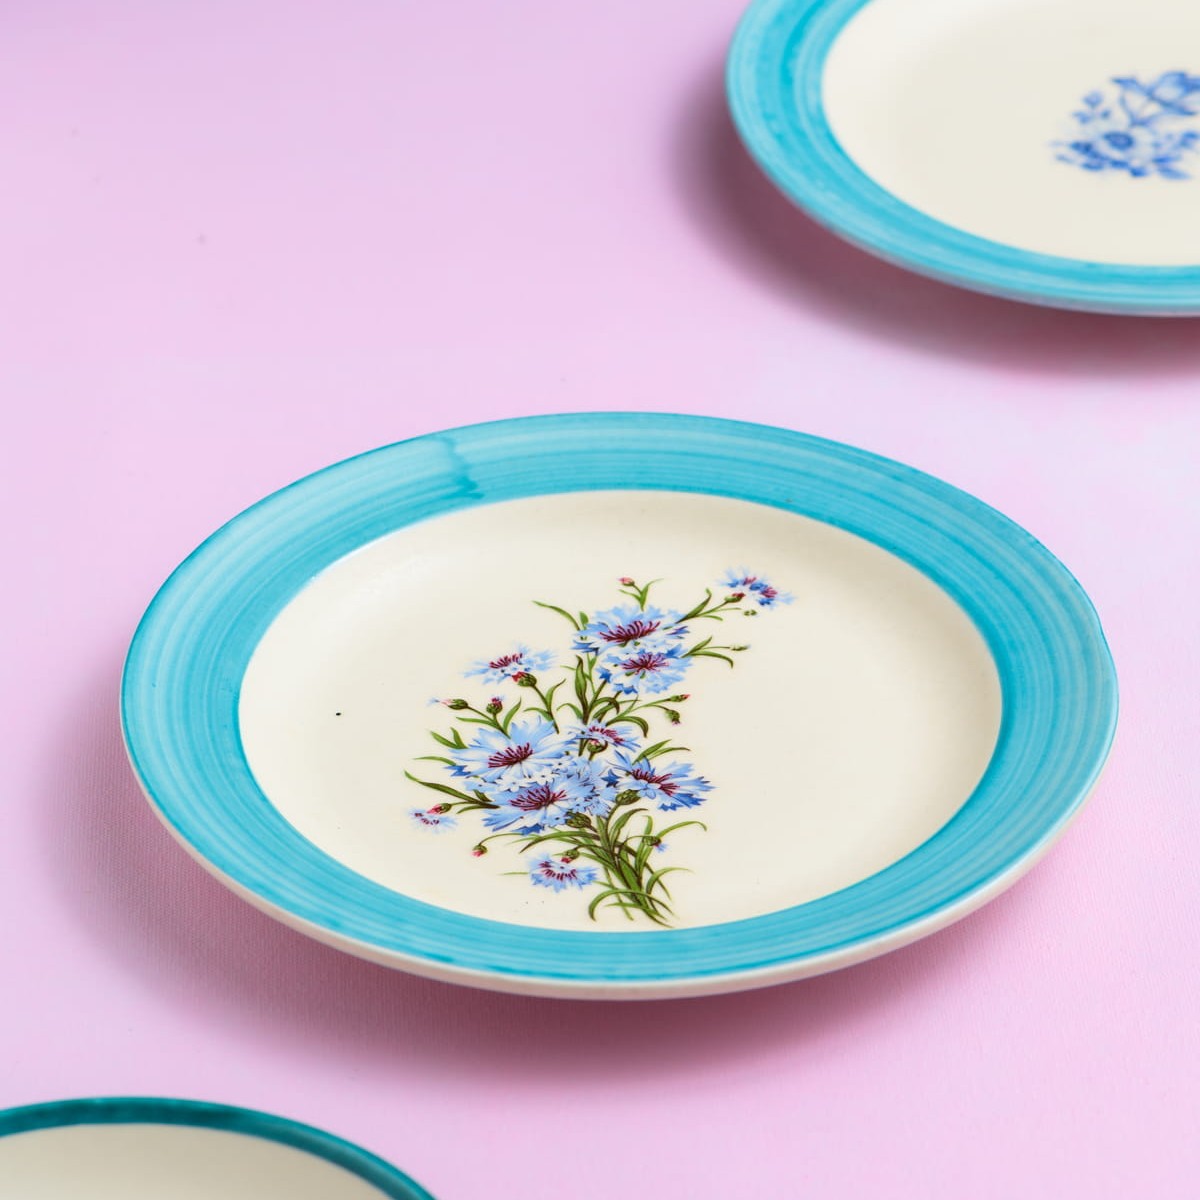 Floral Whispers in Sky Blue Wall Decor Ceramics Plate Set of 3